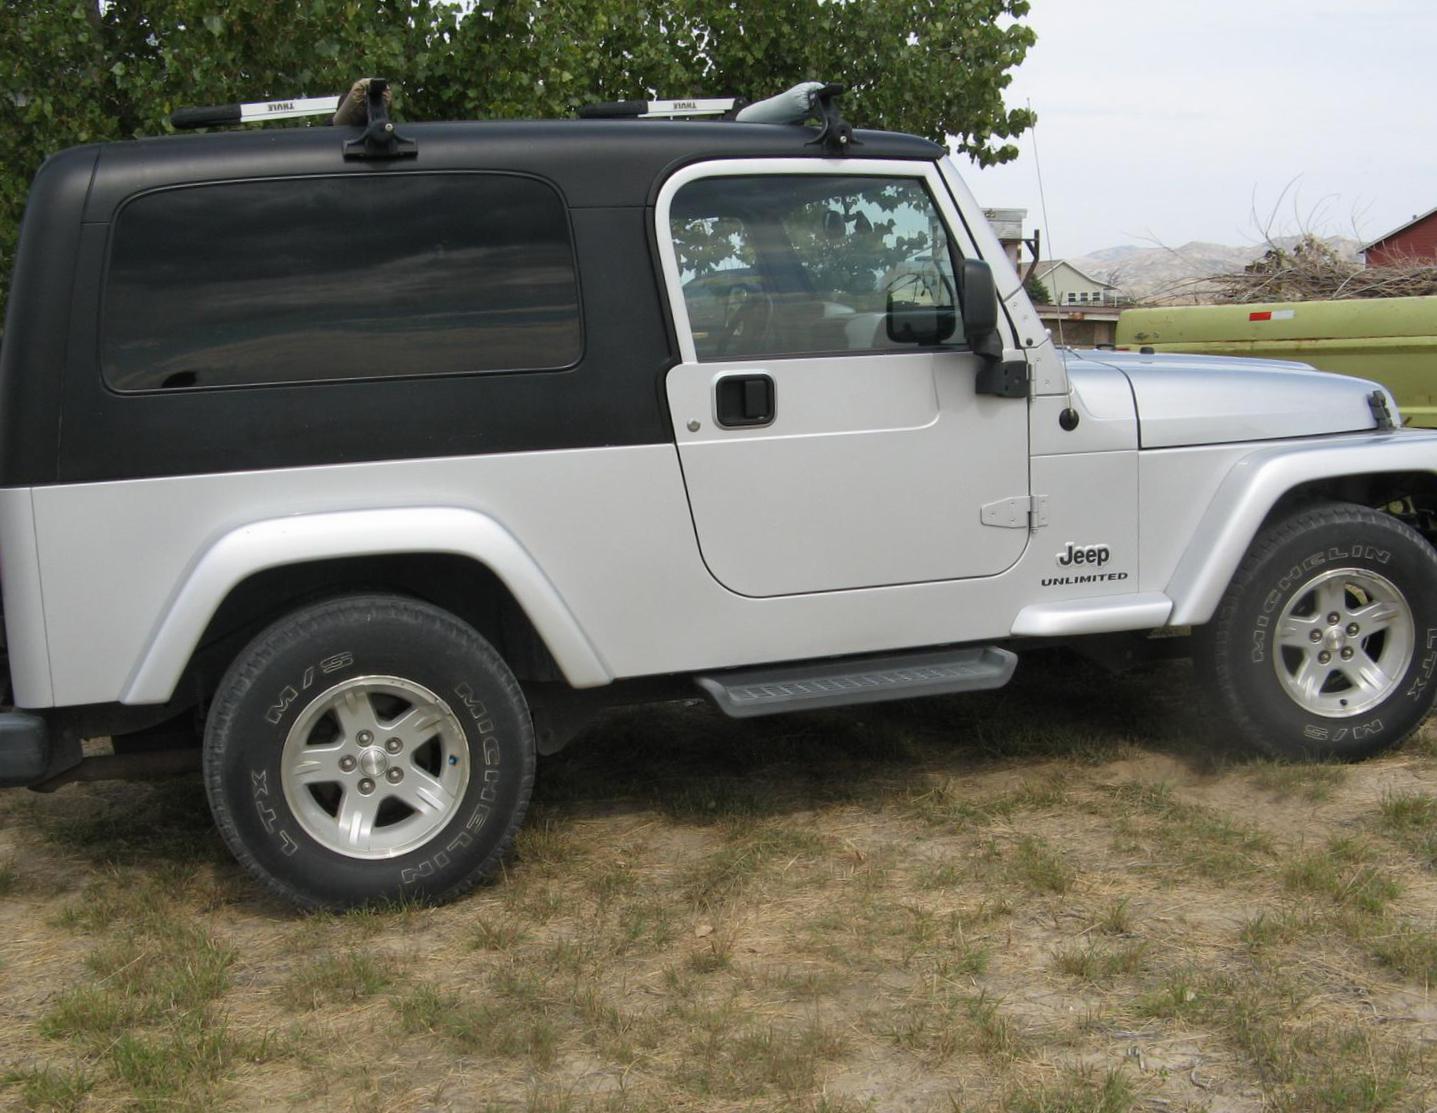 Jeep Wrangler Unlimited review 2013